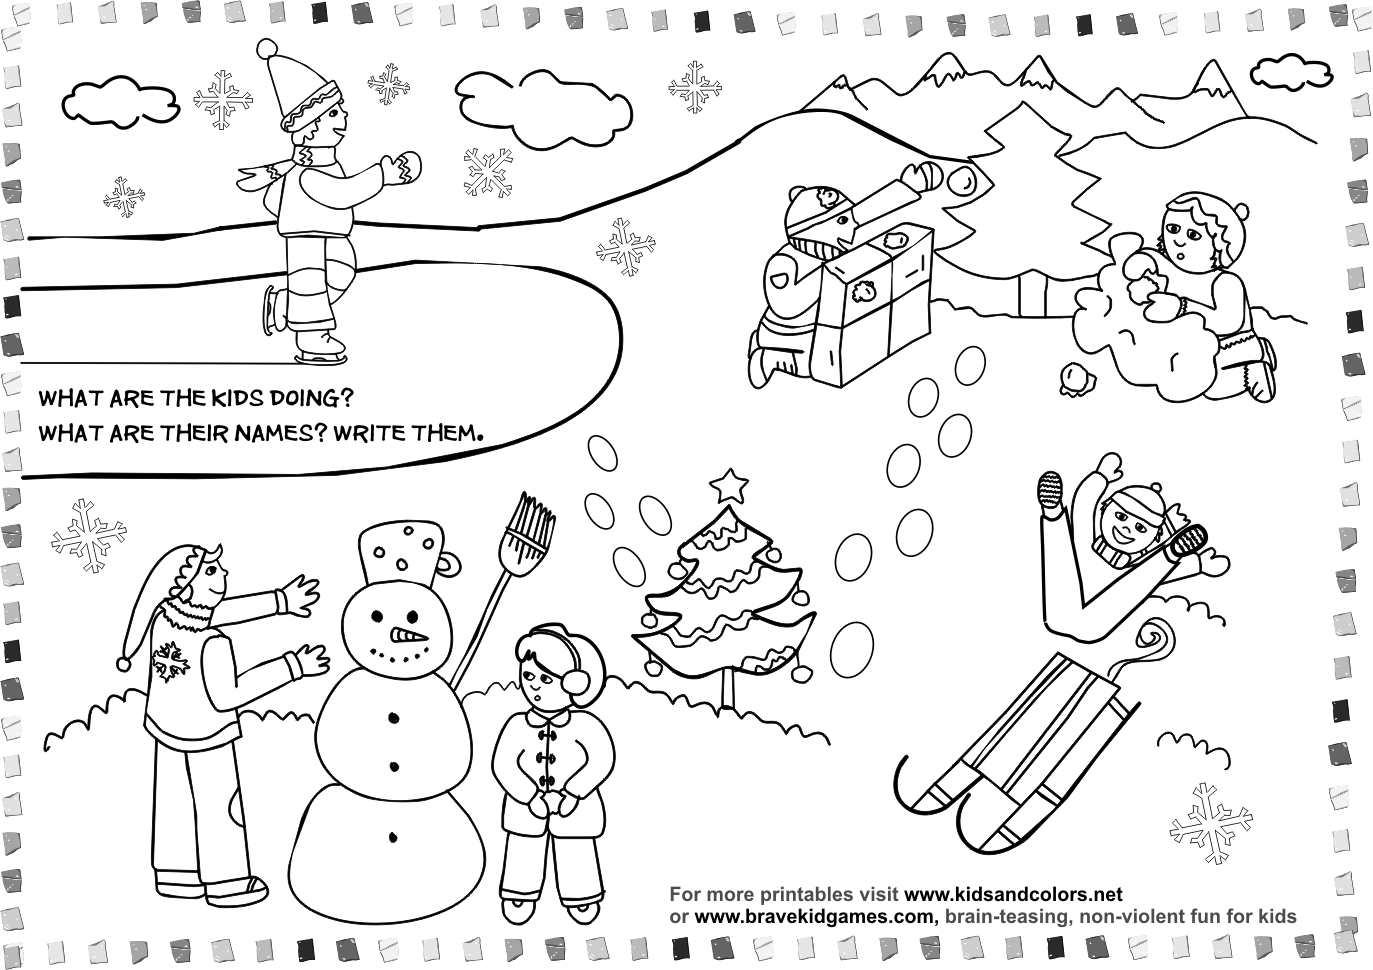 coloring-pages-crafts-and-worksheets-for-preschooltoddler-and-winter